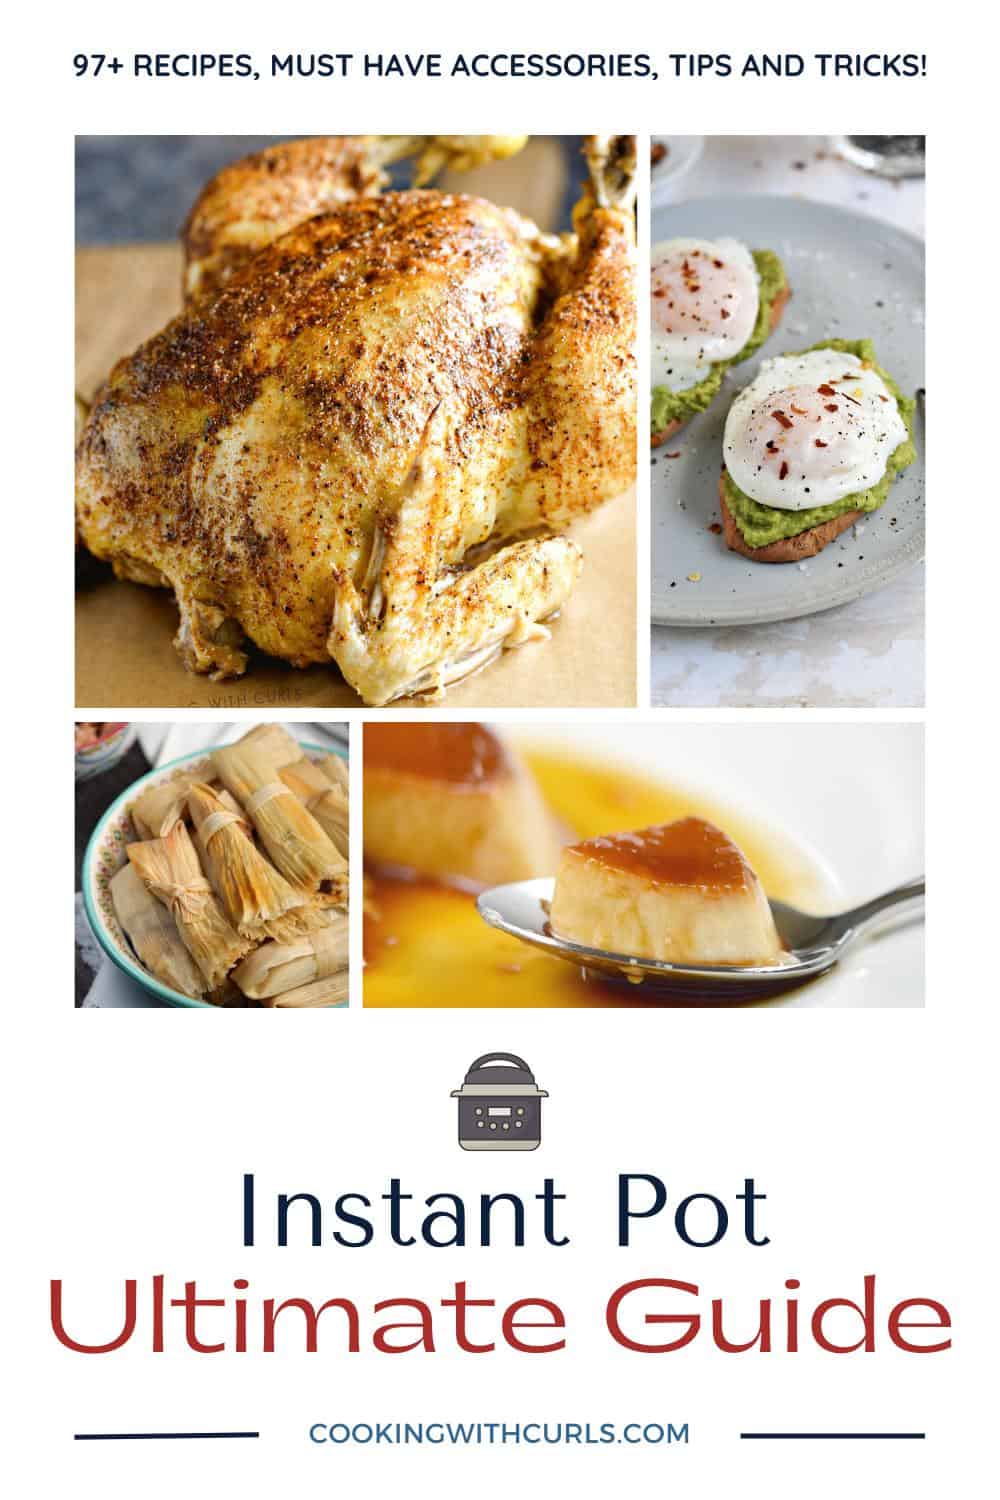 A collage image for 97 plus Instant Pot Recipes.